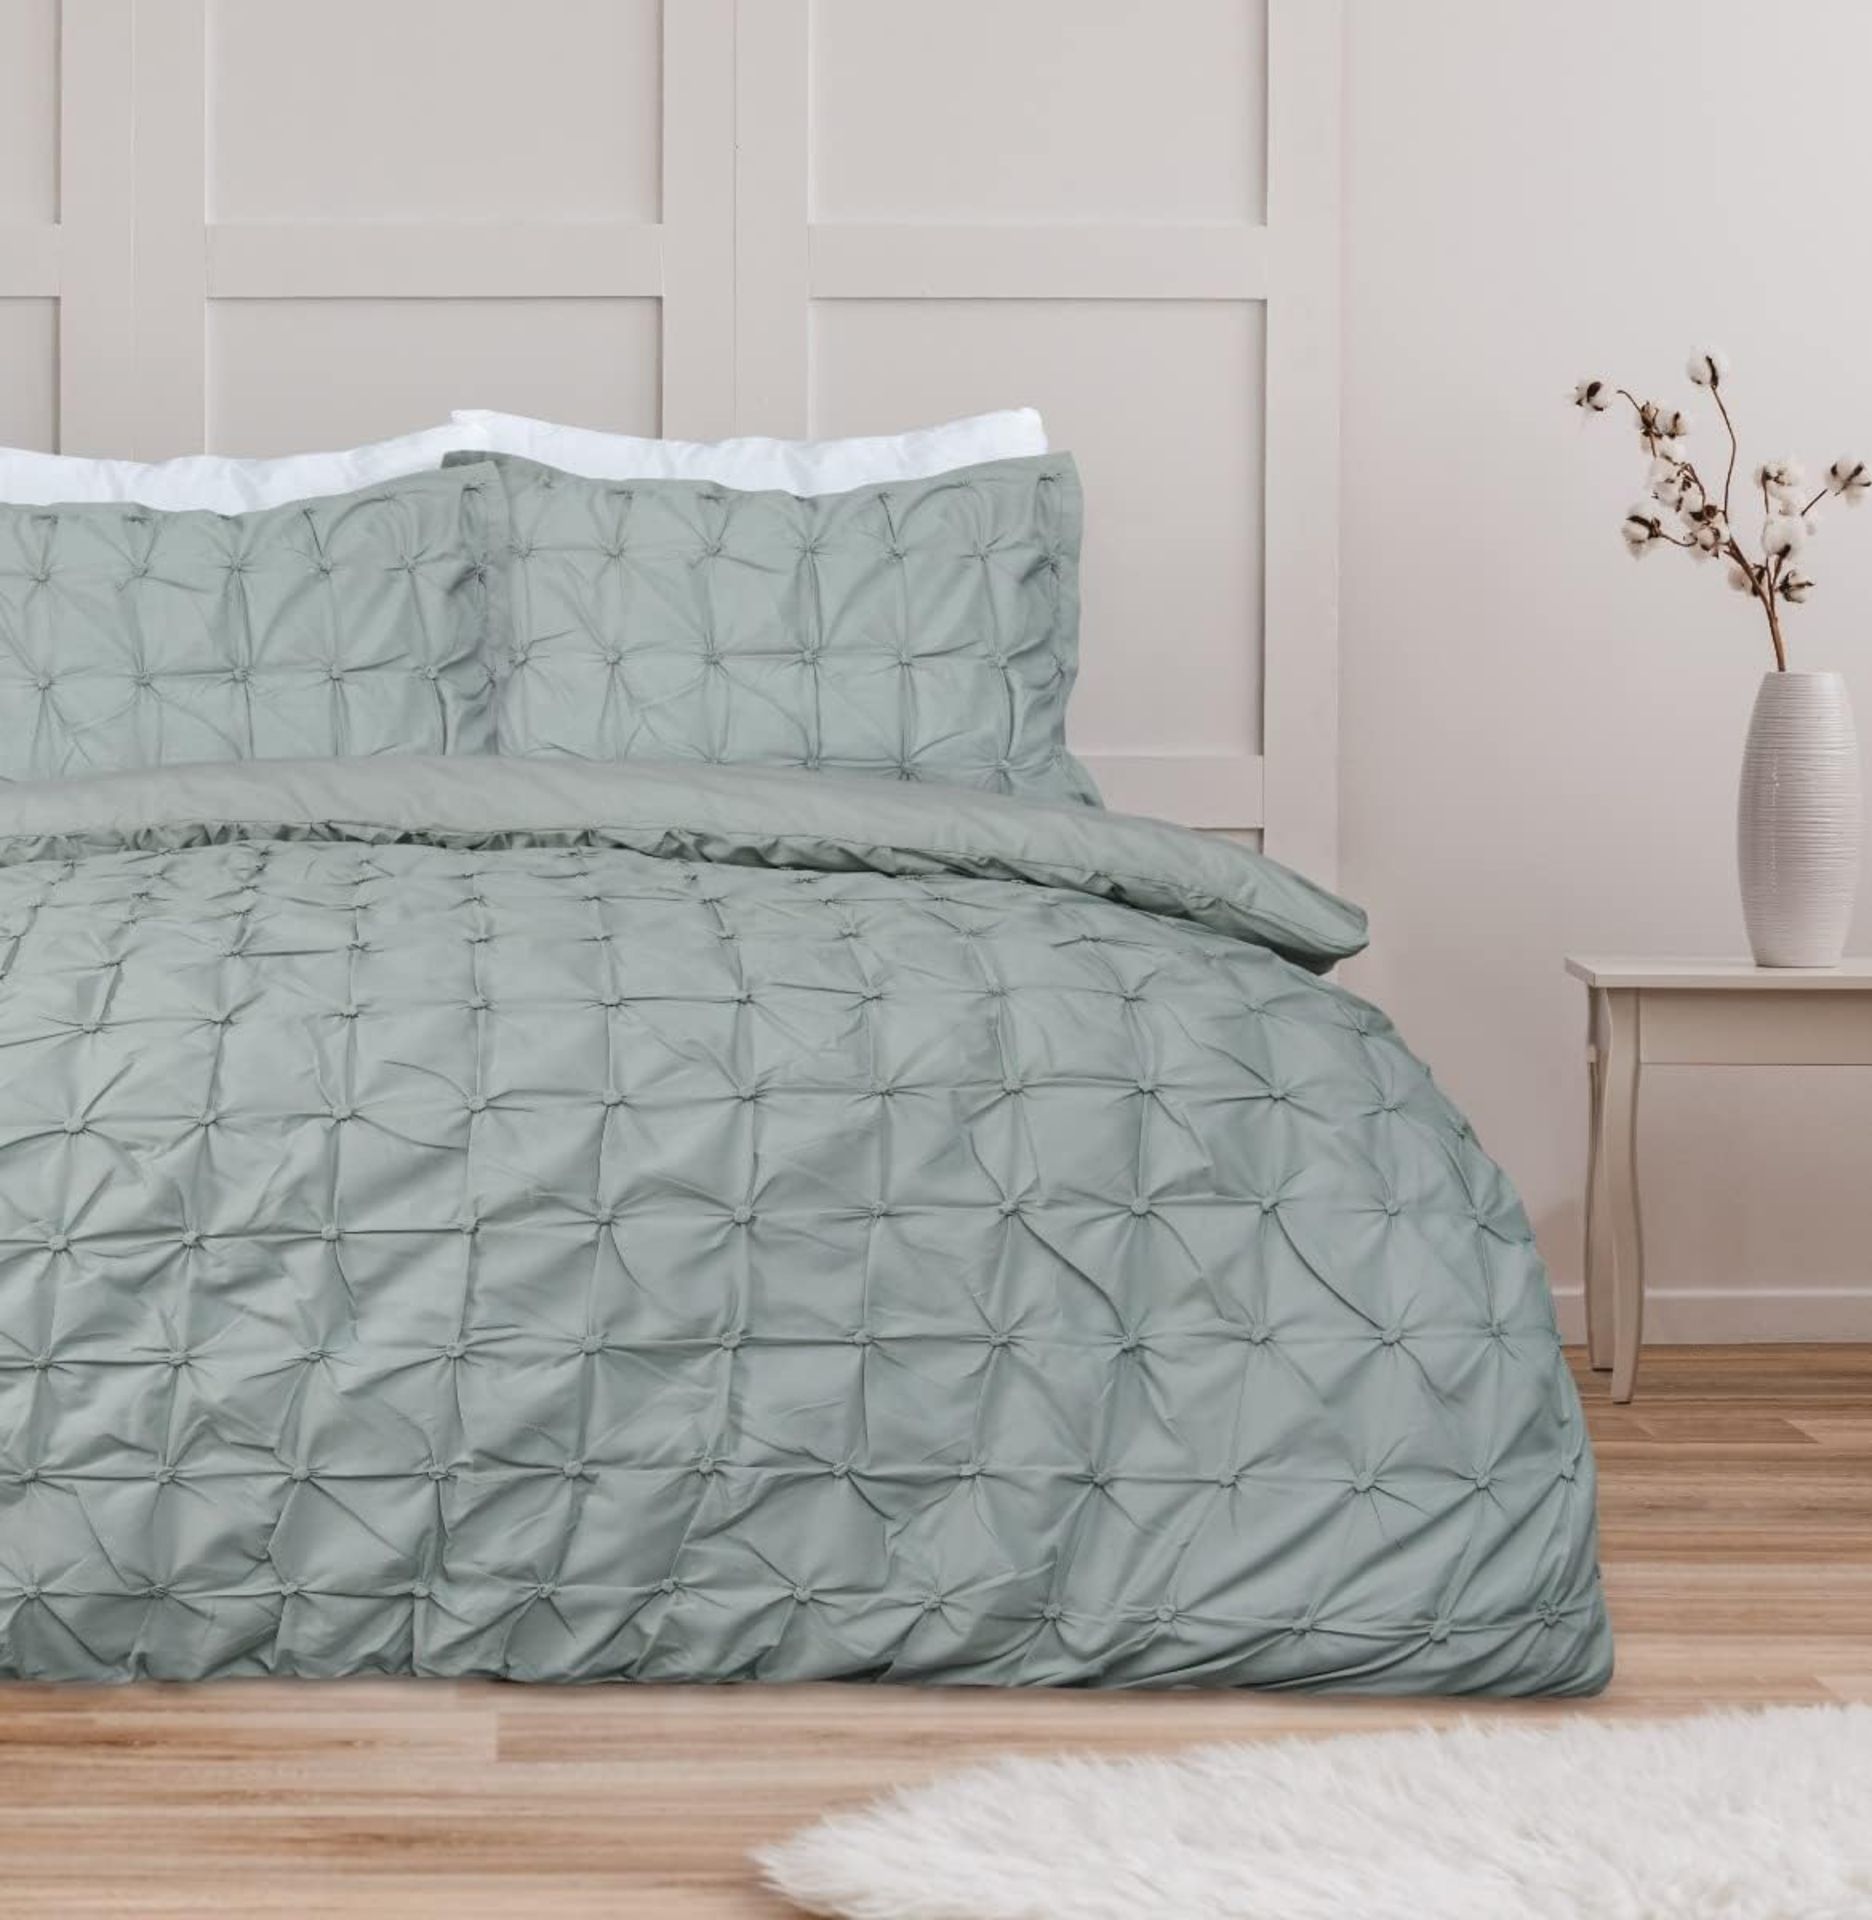 11x NEW & PACKAGED SLEEPDOWN Rouched Easy Care SINGLE Duvet Set - SAGE GREEN. RRP £22.99 EACH. (R7- - Image 2 of 7